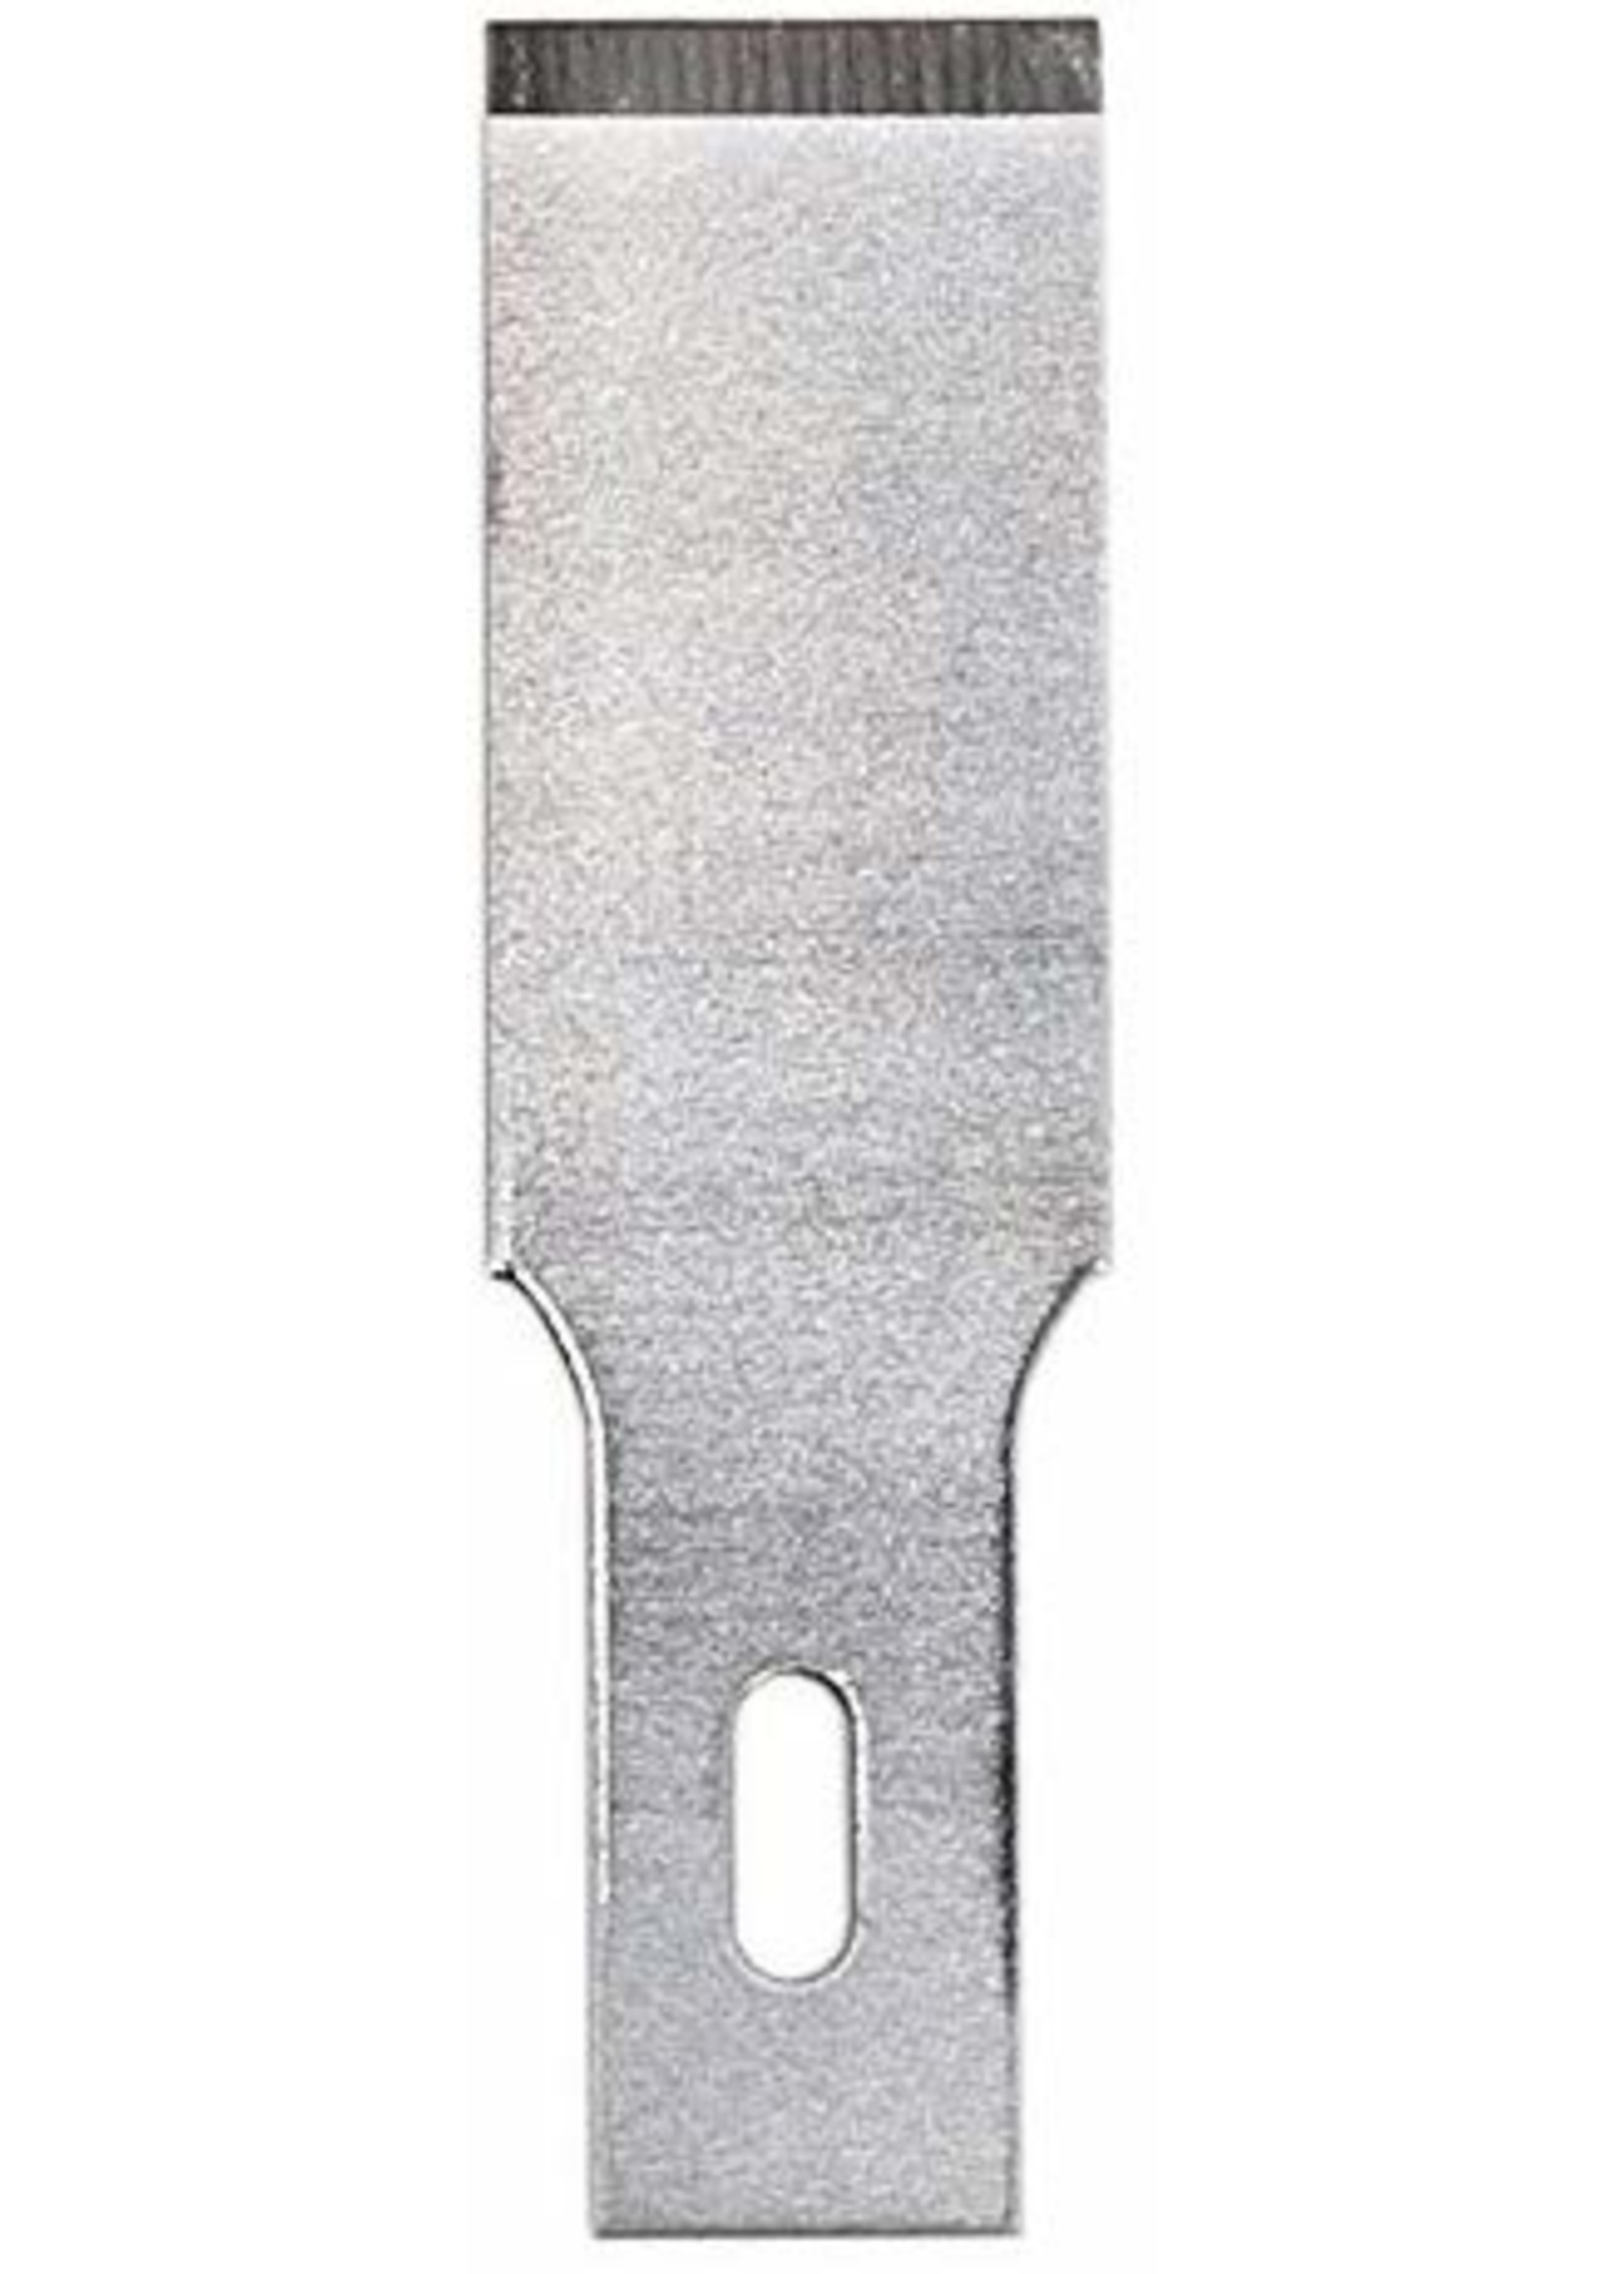 Excel 20018 - #18 Replacement Large Chisel Blades (5)